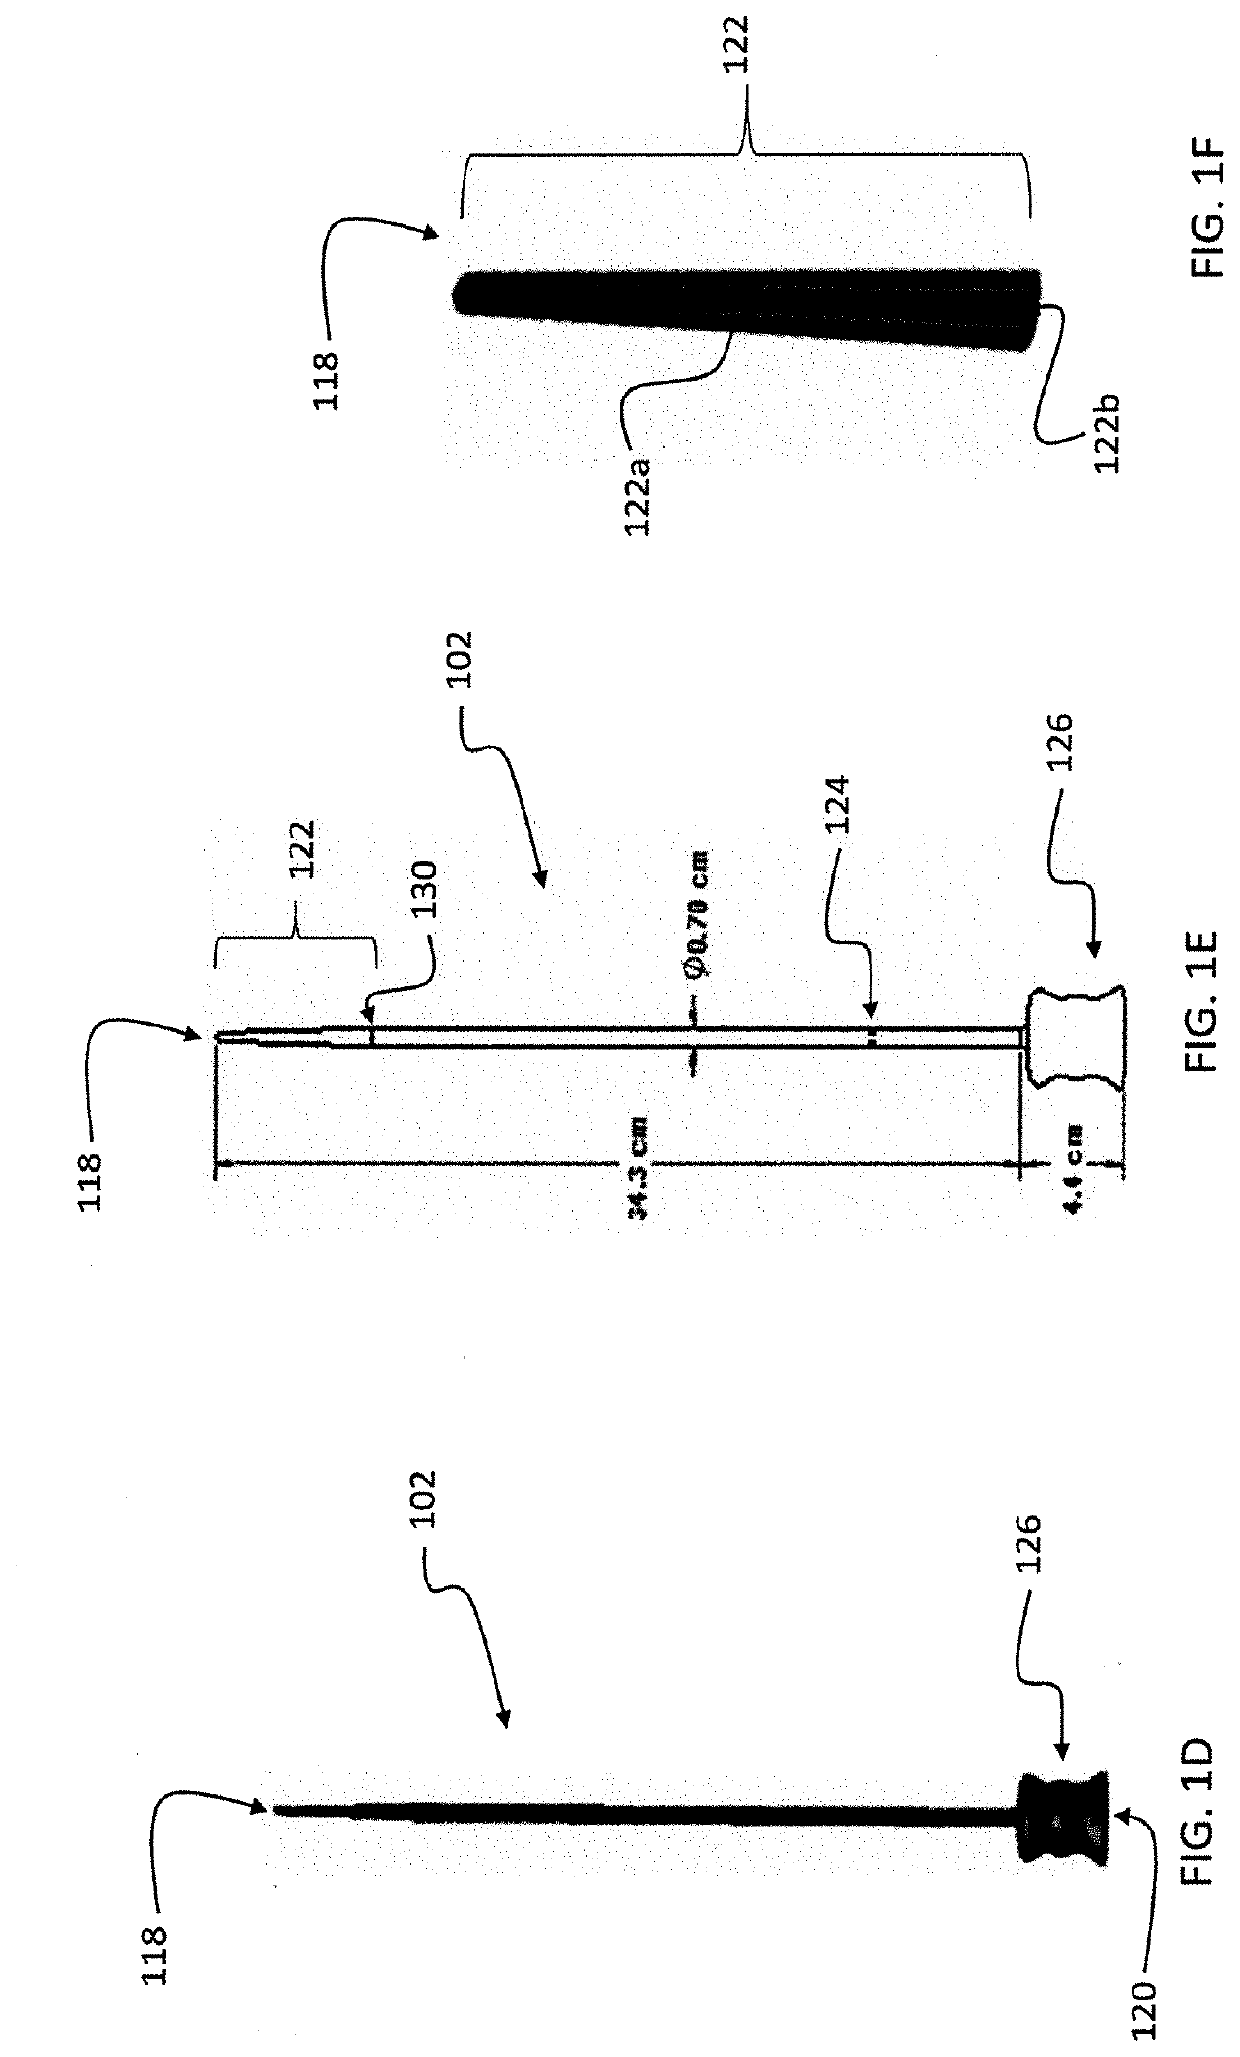 Esophageal deflection device